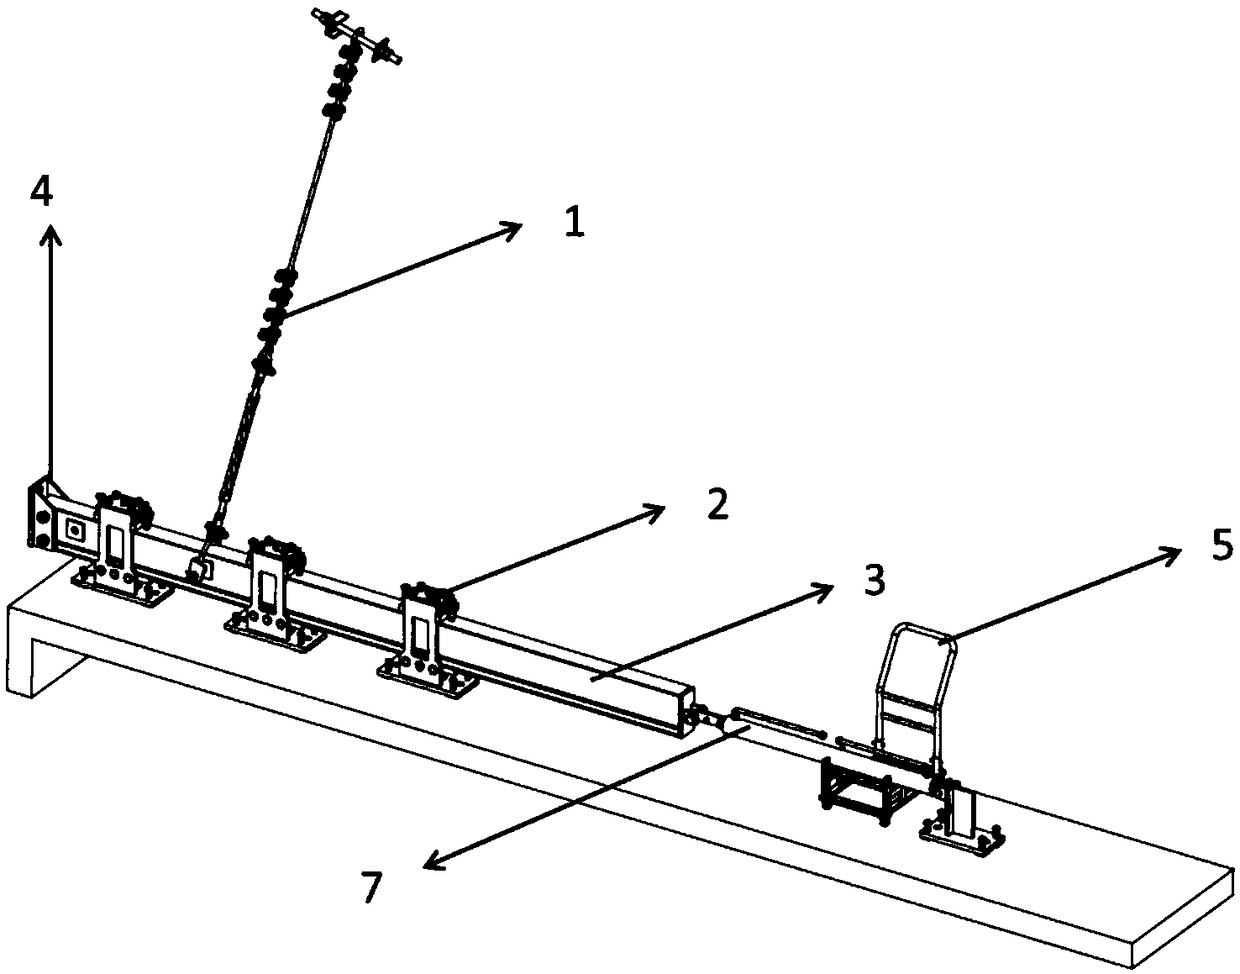 Lifting scaffold capable of moving horizontally